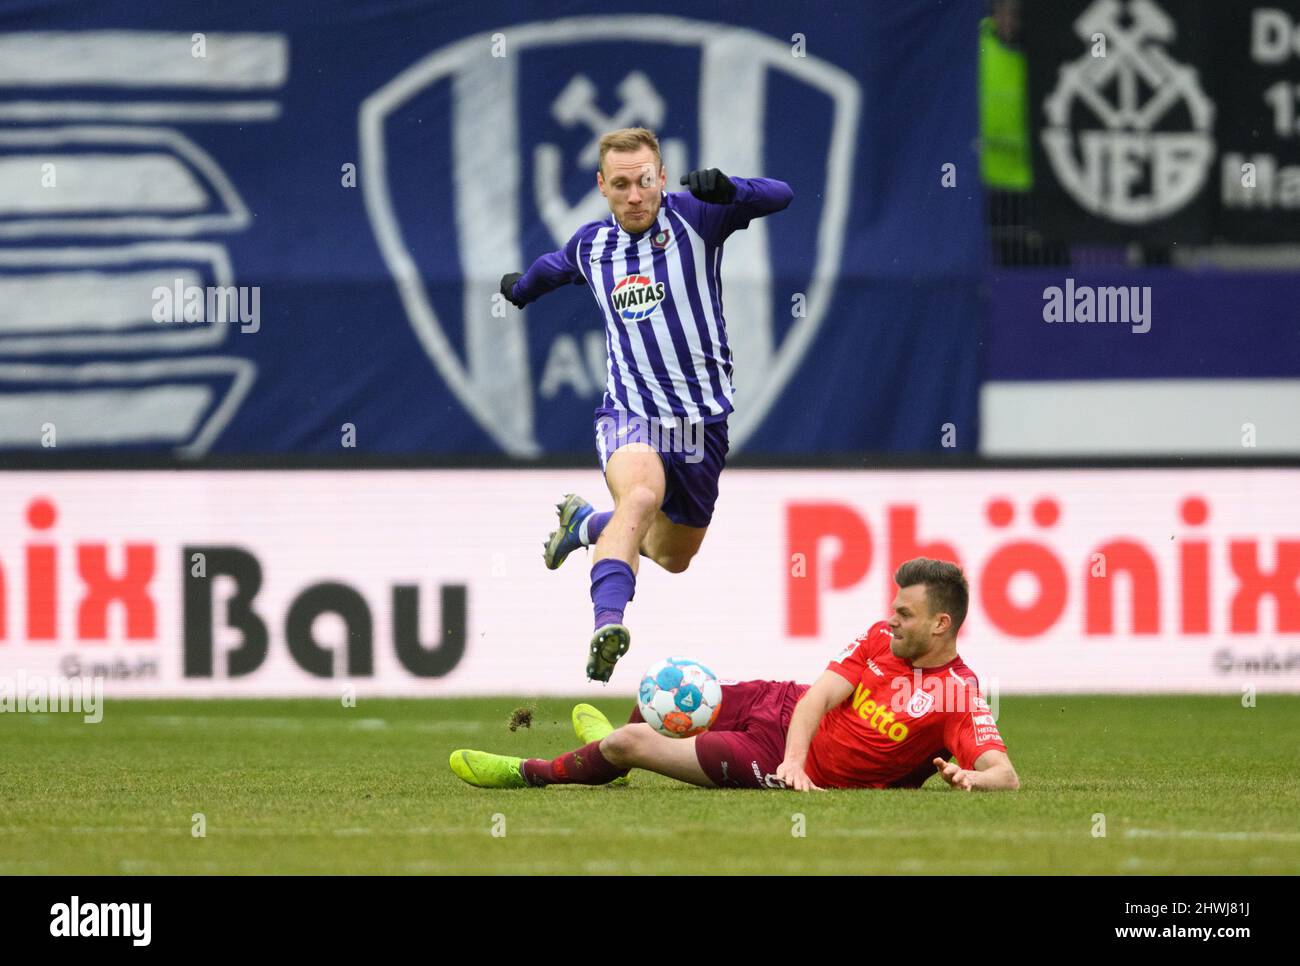 Aue, Germany. 06th Mar, 2022. Soccer: 2. Bundesliga, FC Erzgebirge Aue - Jahn Regensburg, Matchday 25, Erzgebirgsstadion. Aue's Ben Zolinski (l) against Regensburg's Benedikt Saller. Credit: Robert Michael/dpa-Zentralbild/dpa - IMPORTANT NOTE: In accordance with the requirements of the DFL Deutsche Fußball Liga and the DFB Deutscher Fußball-Bund, it is prohibited to use or have used photographs taken in the stadium and/or of the match in the form of sequence pictures and/or video-like photo series./dpa/Alamy Live News Stock Photo